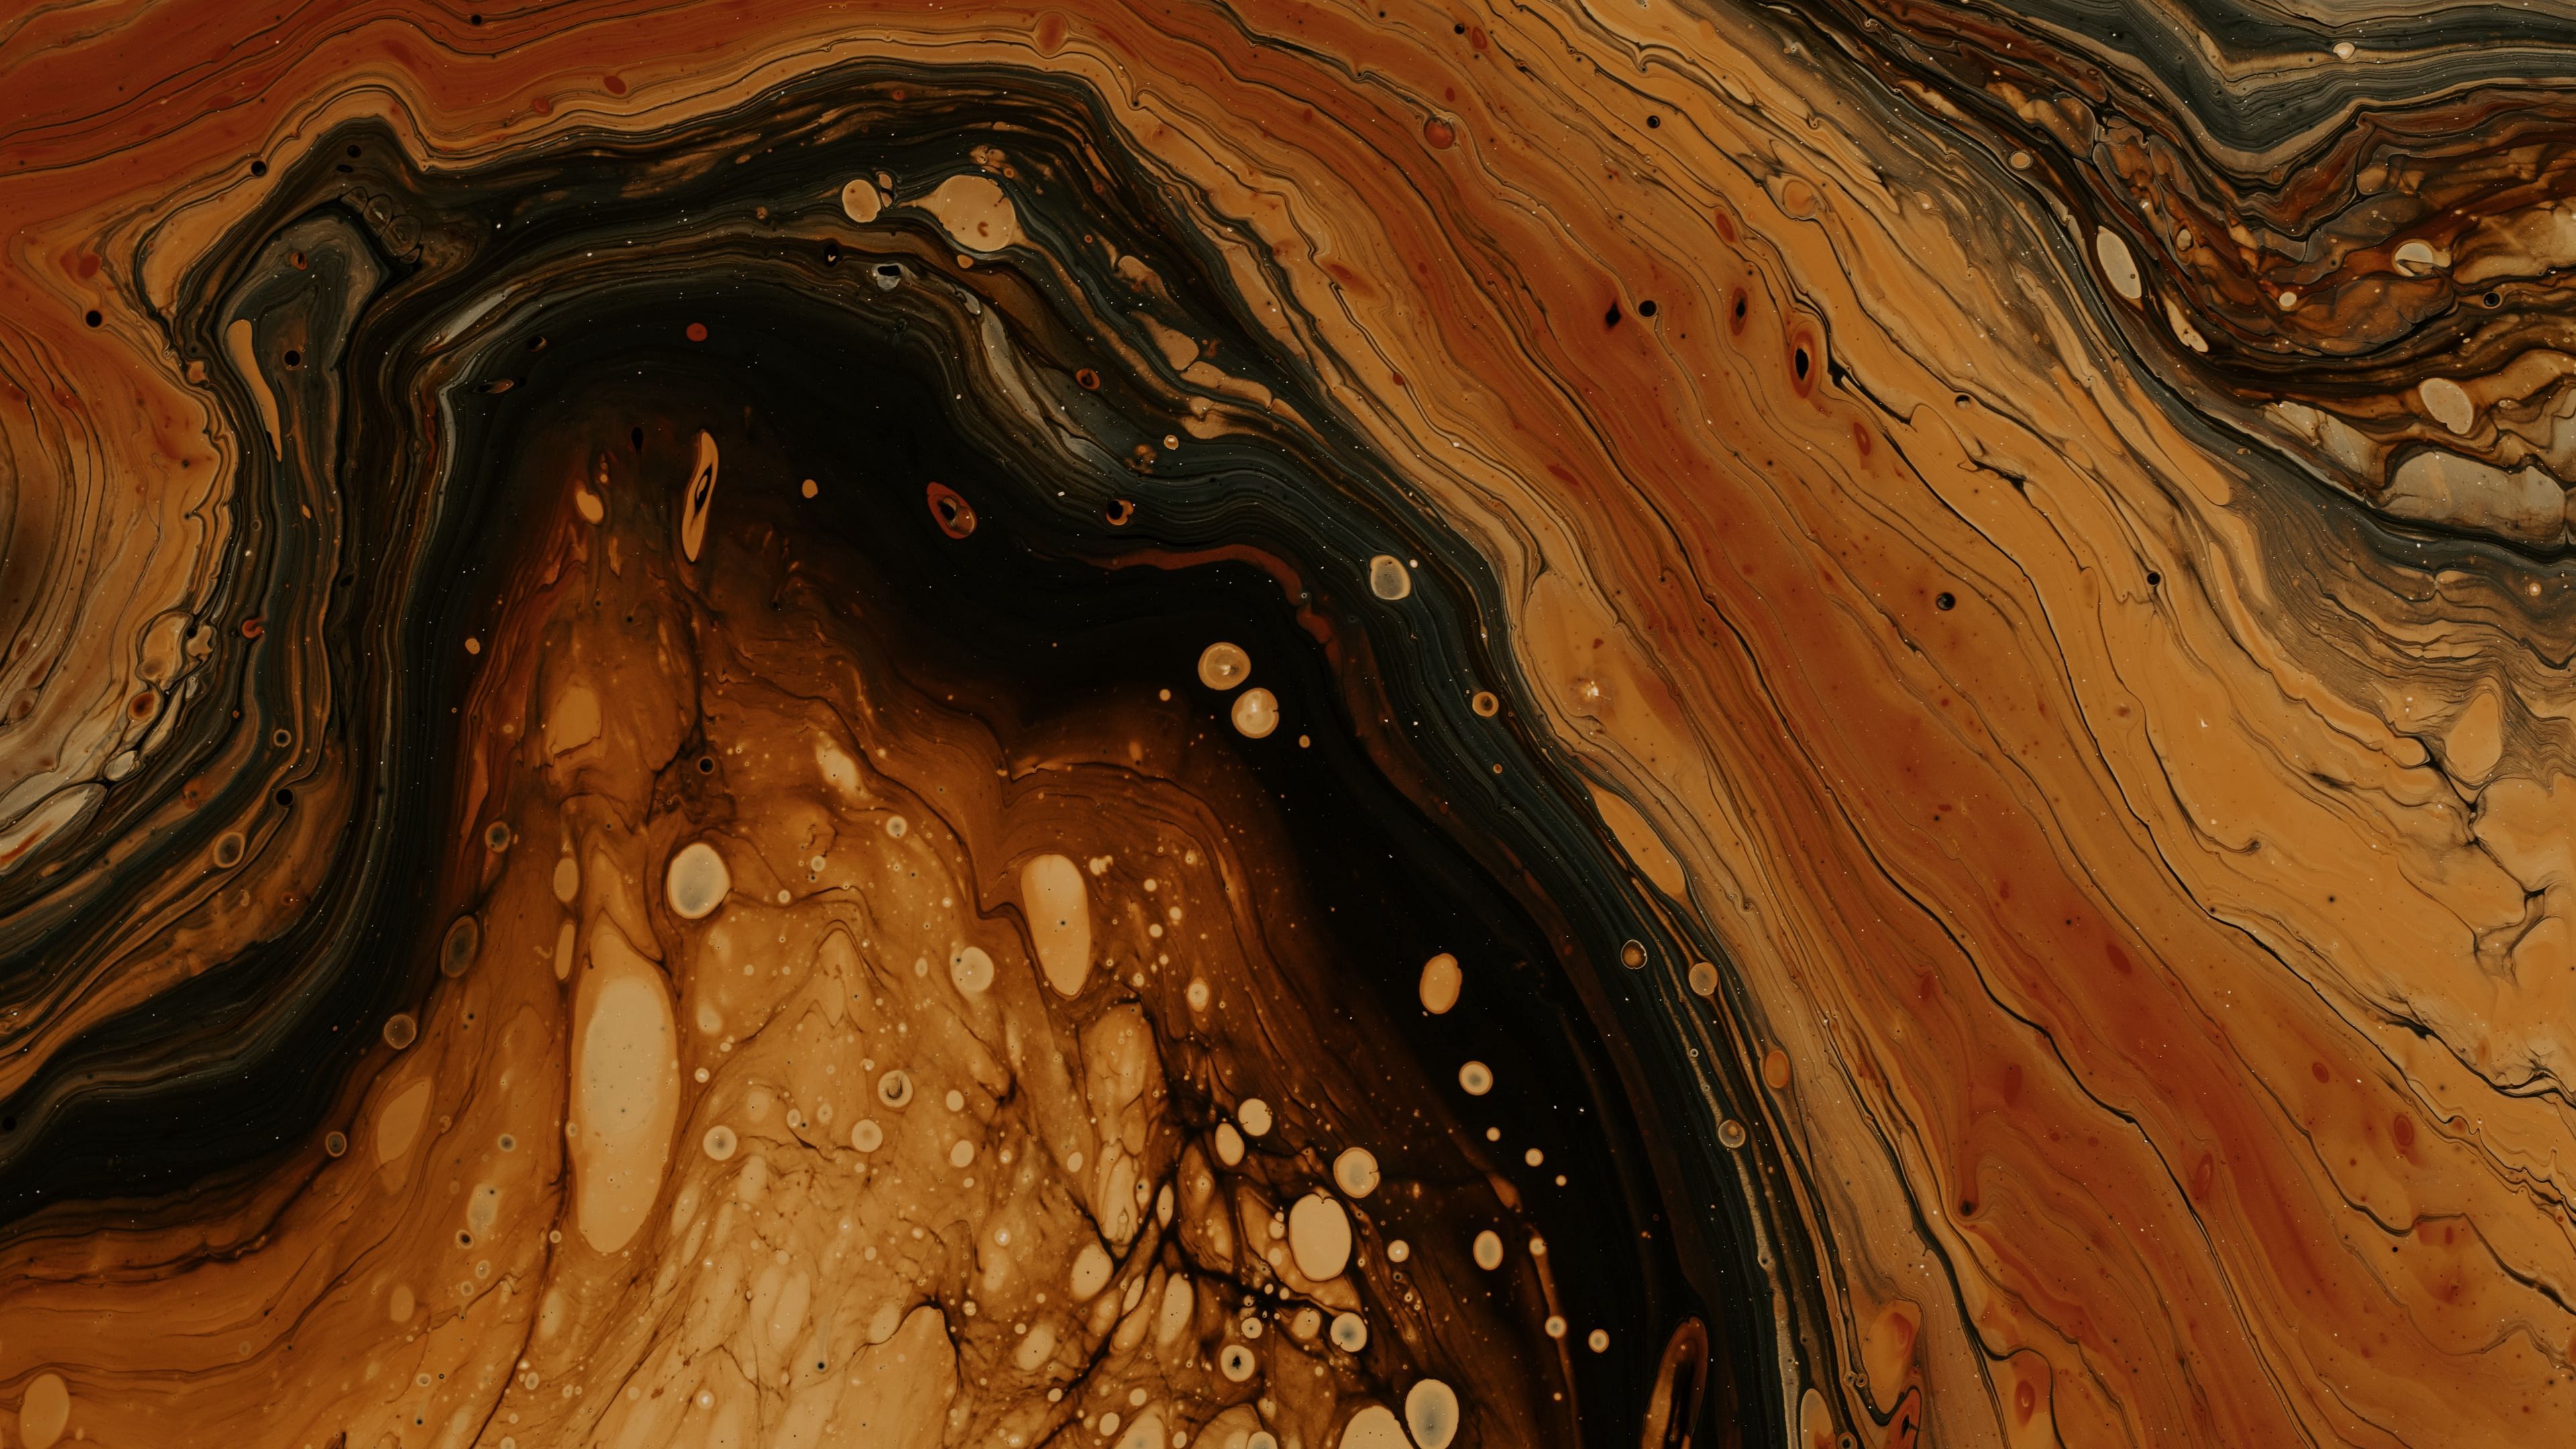 Download wallpaper 3840x2160 stains, paint, brown, abstraction, liquid 4k uhd 16:9 HD background